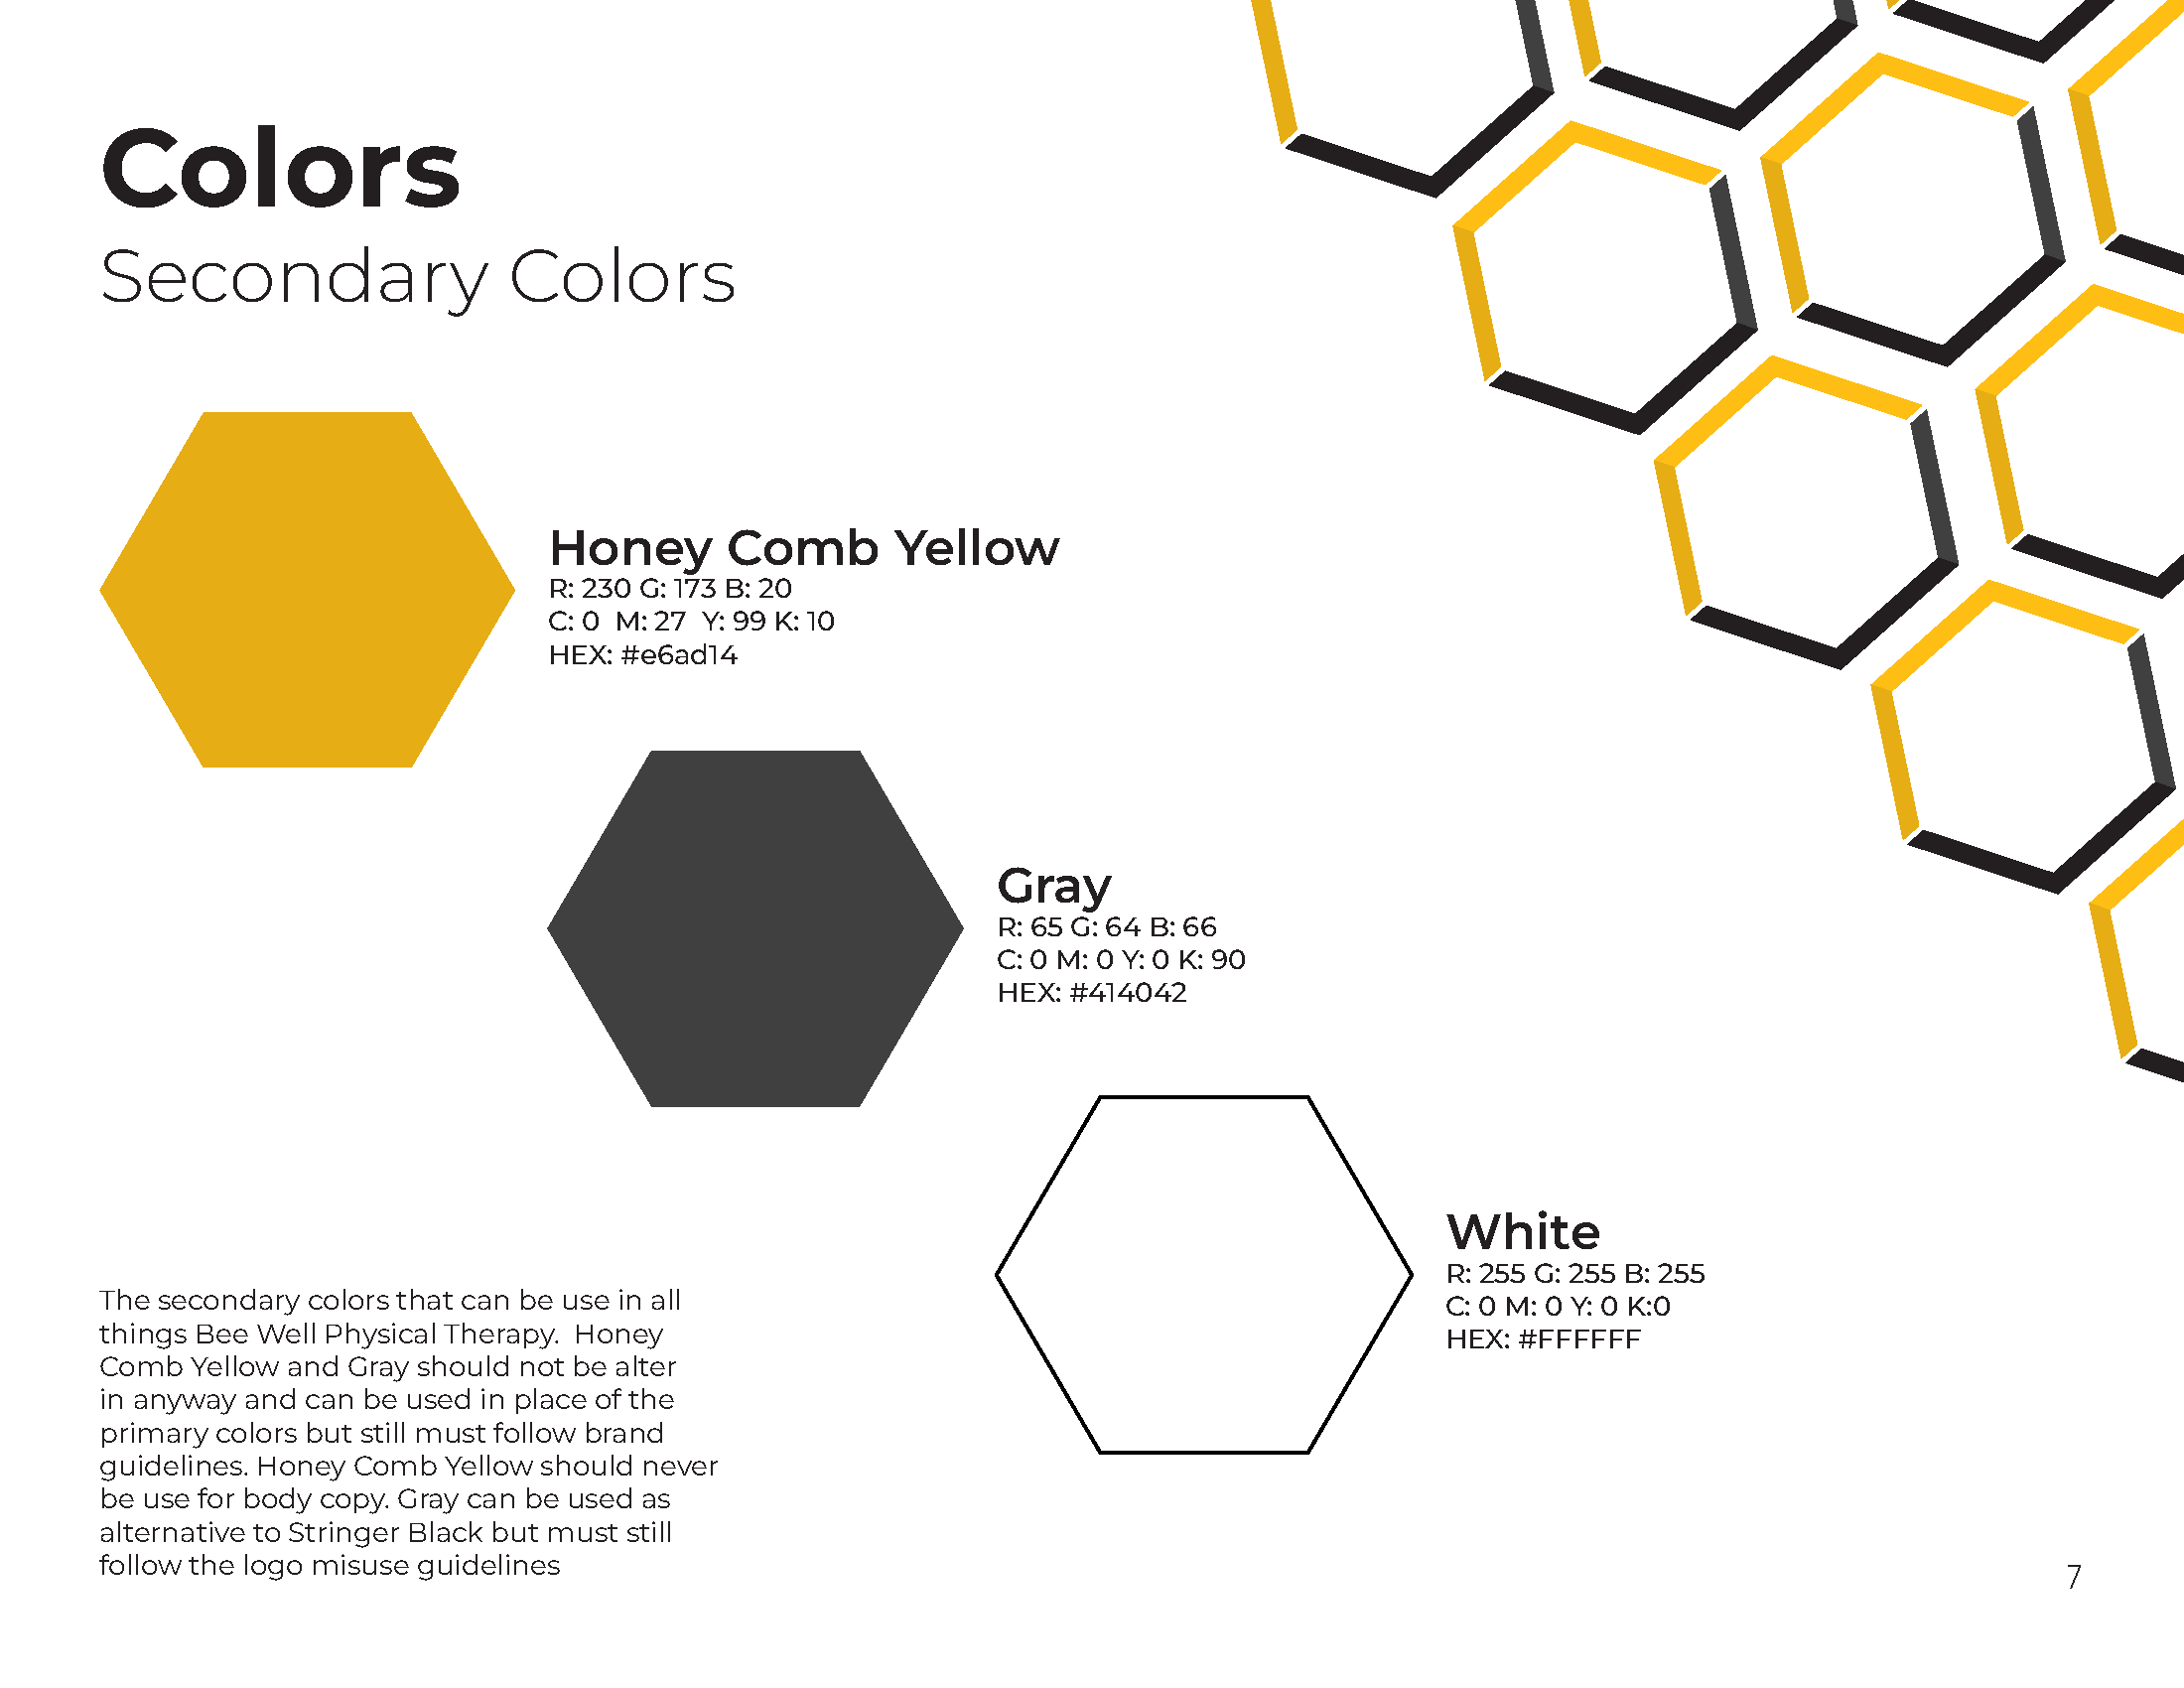 Secondary colors are Honey Comb Yellow, Gray, and White.